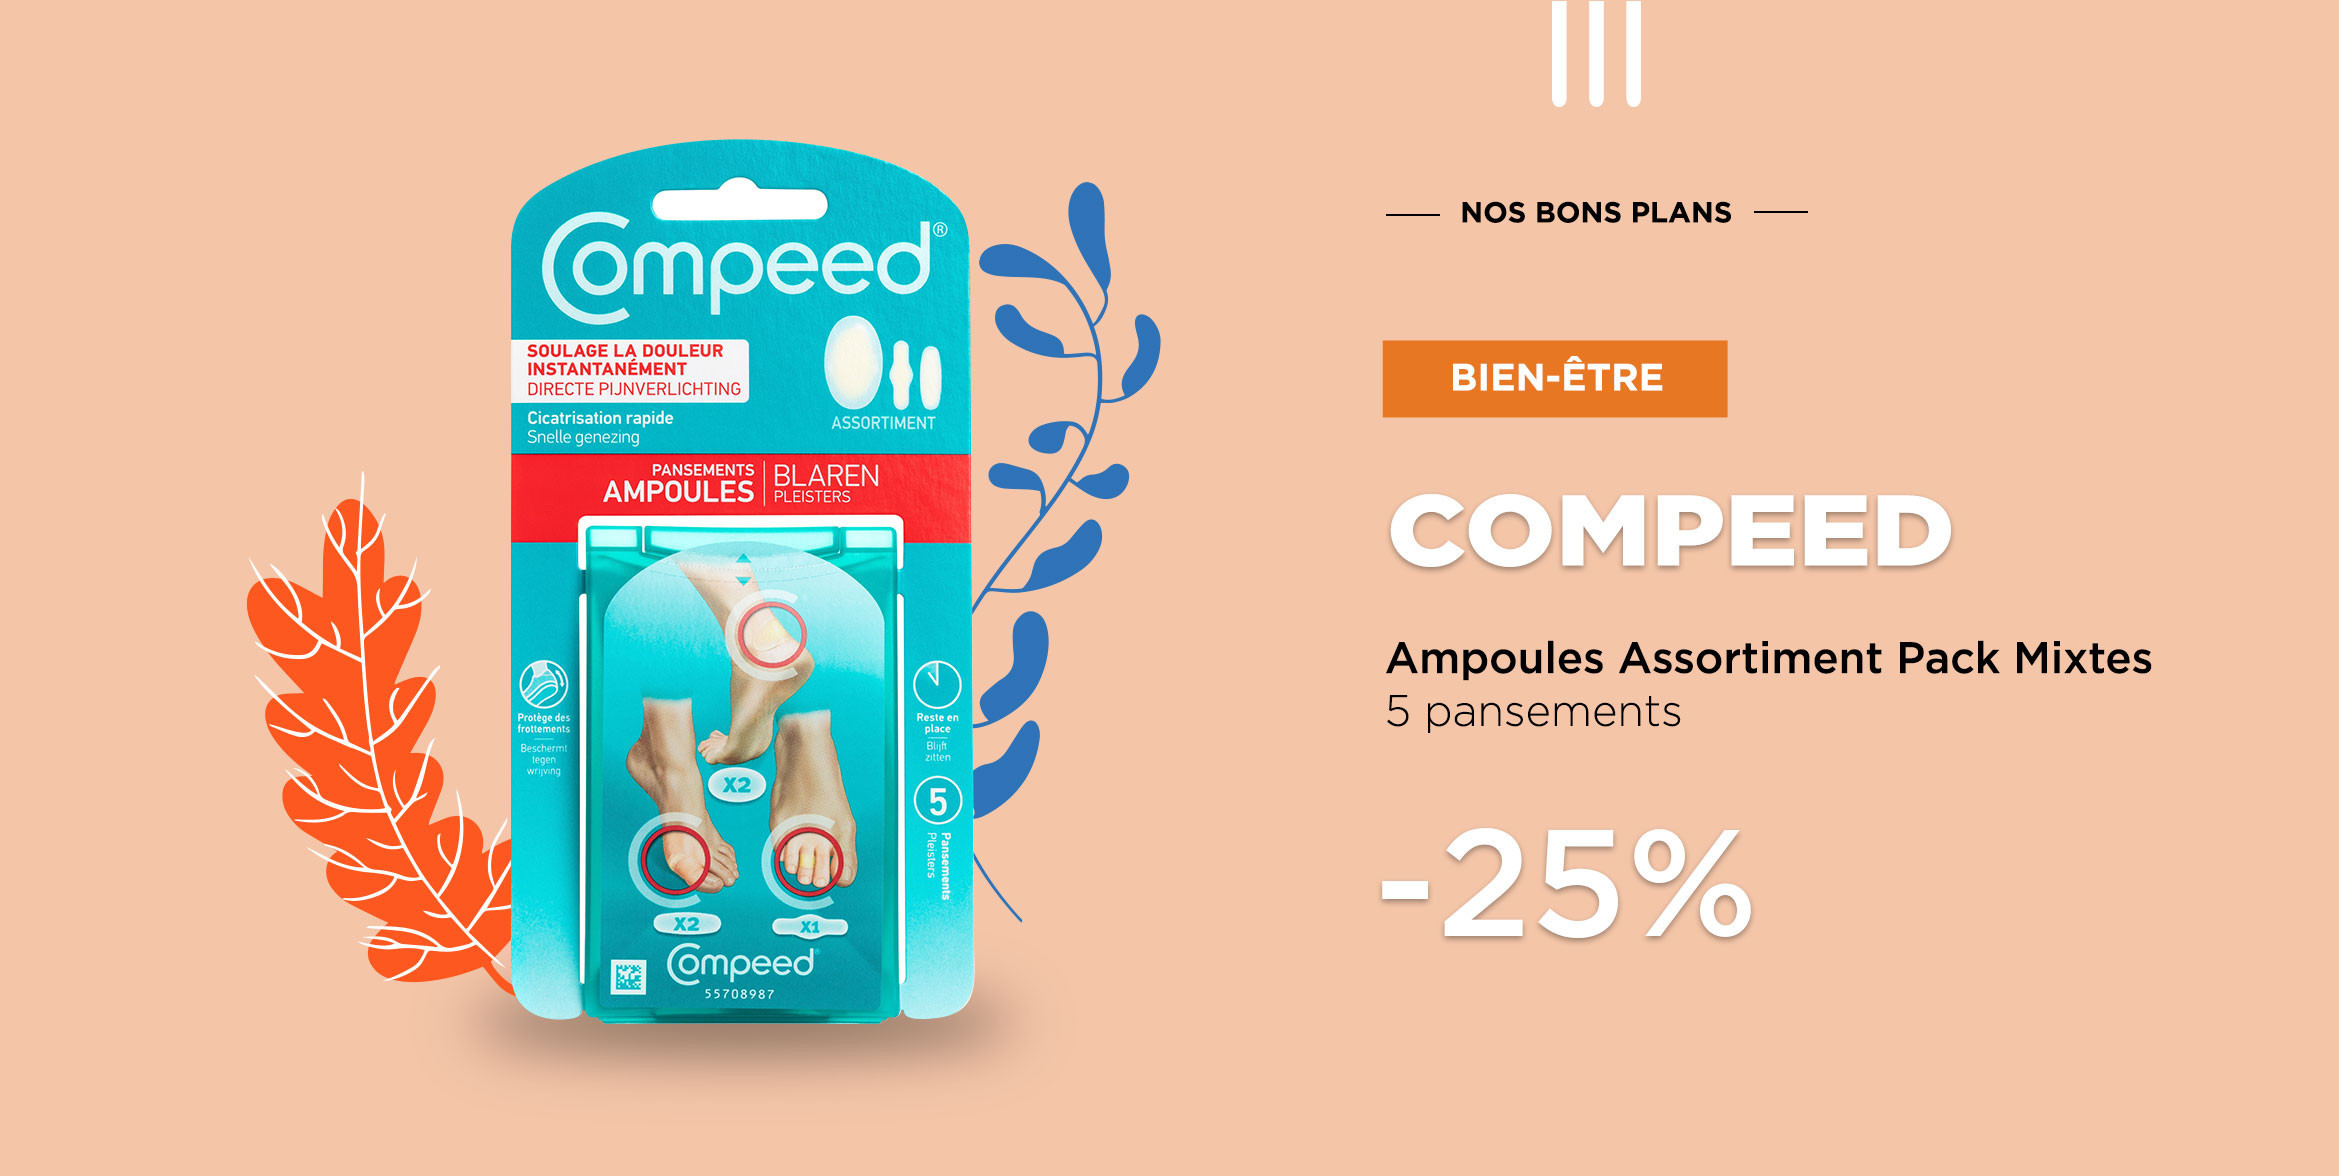 COMPEED Ampoules Assortiment Pack Mixtes - 5 pansements